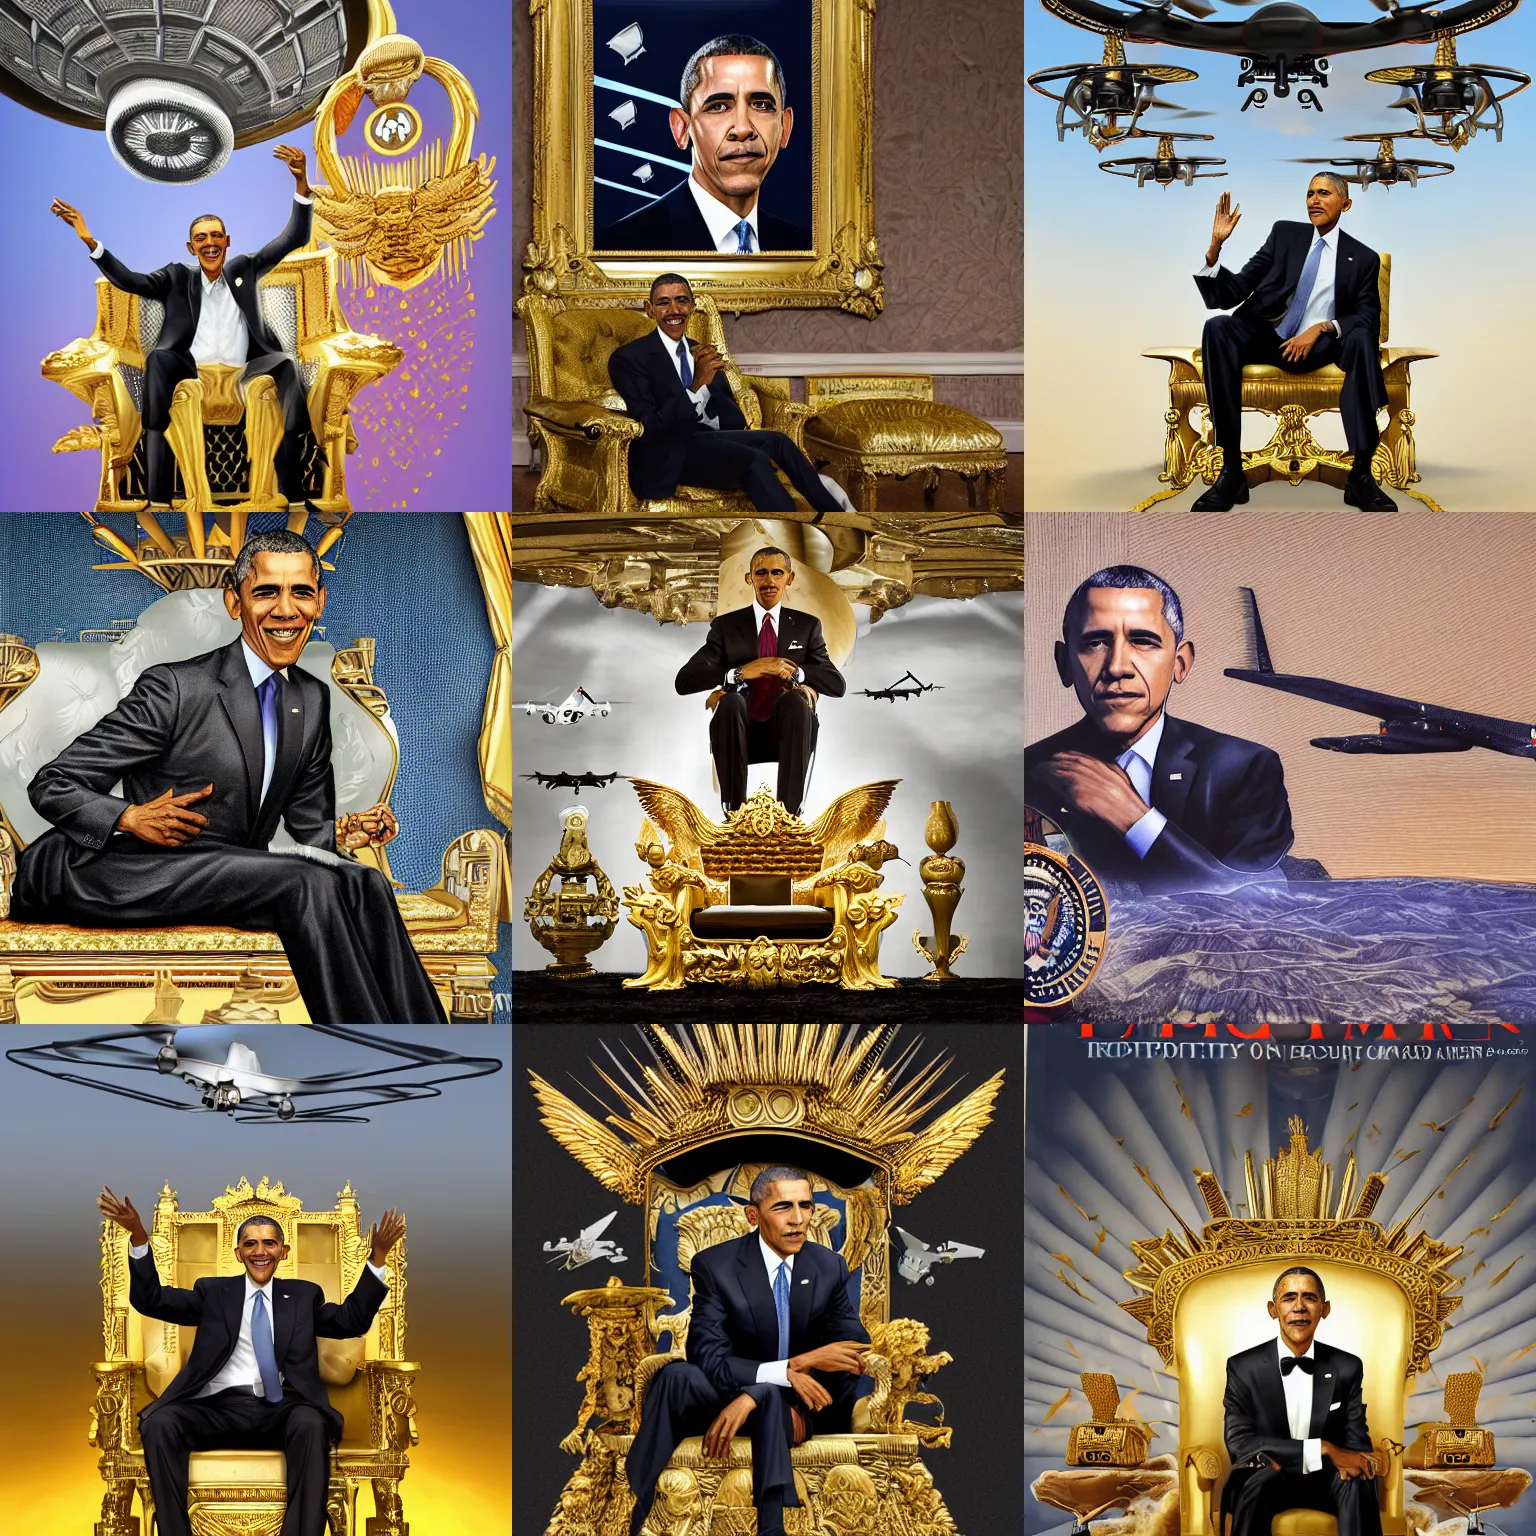 Prompt: hyperrealistic illustration portrait of Barack Obama The Drone King sitting on a golden throne with MQ-1 Predator Drones (military) flying out from under it, Copyright TIME Magazine, (EOS 5DS R, ISO100, f/8, 1/125, 84mm, modelsociety, prime lense)